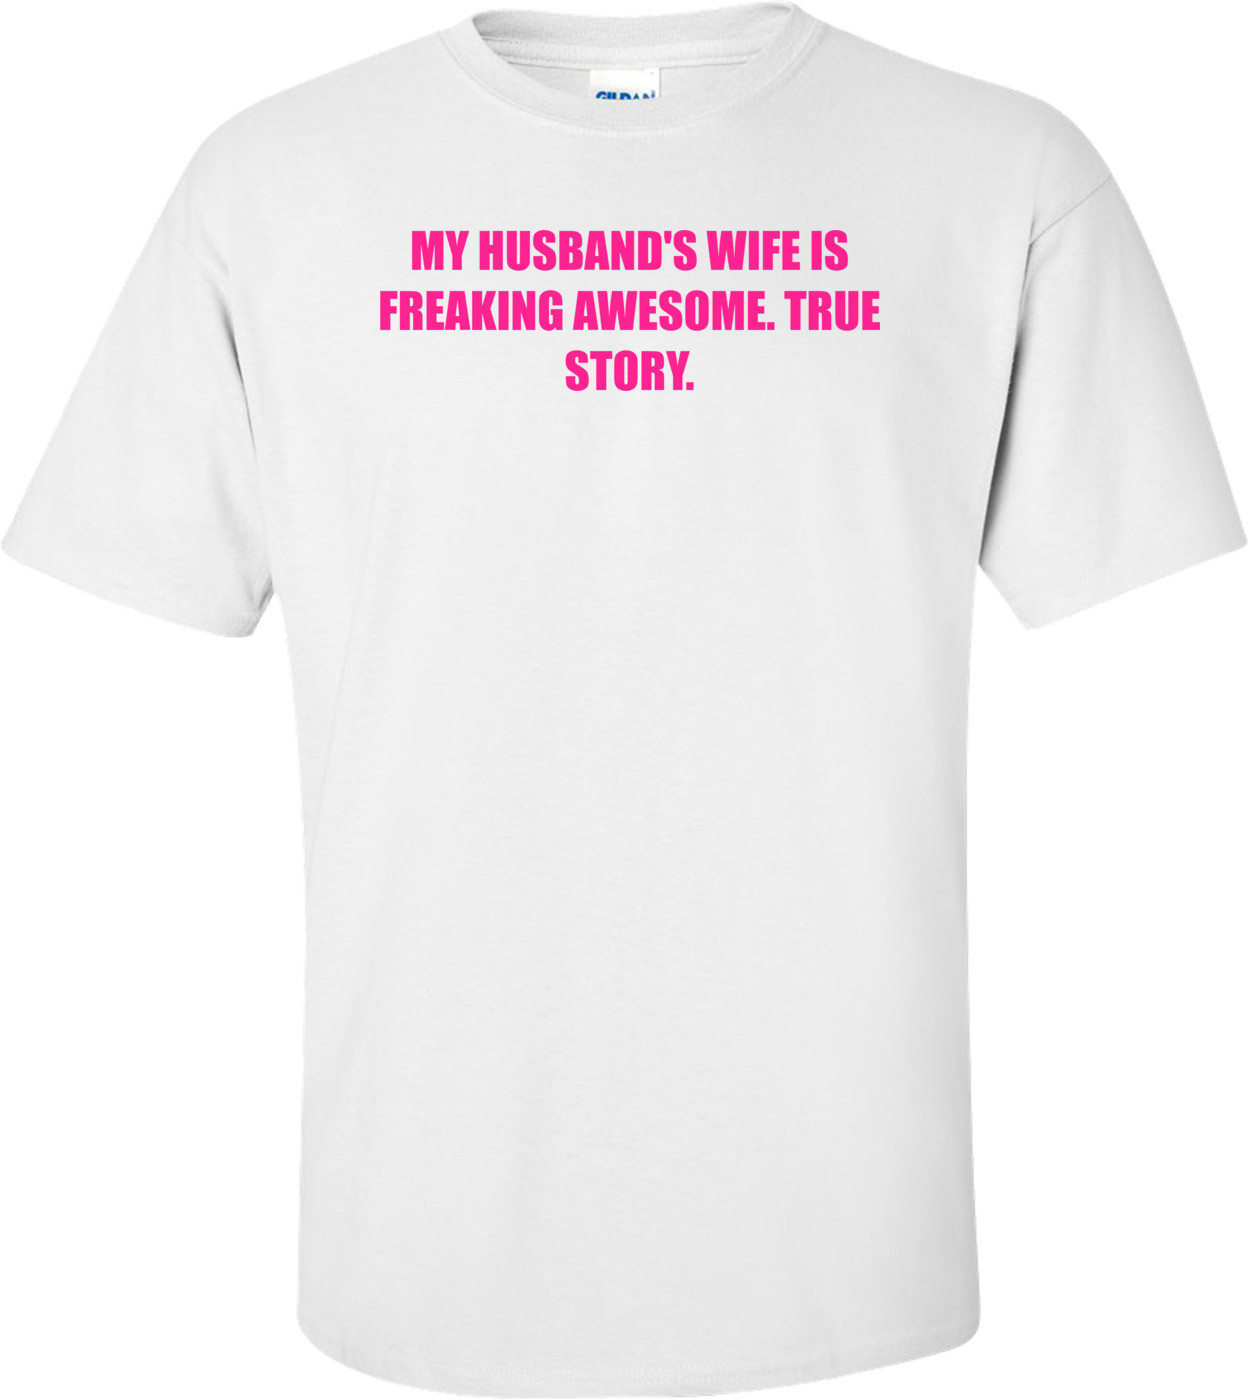 My Husband's Wife Is Freaking Awesome. True Story. Shirt